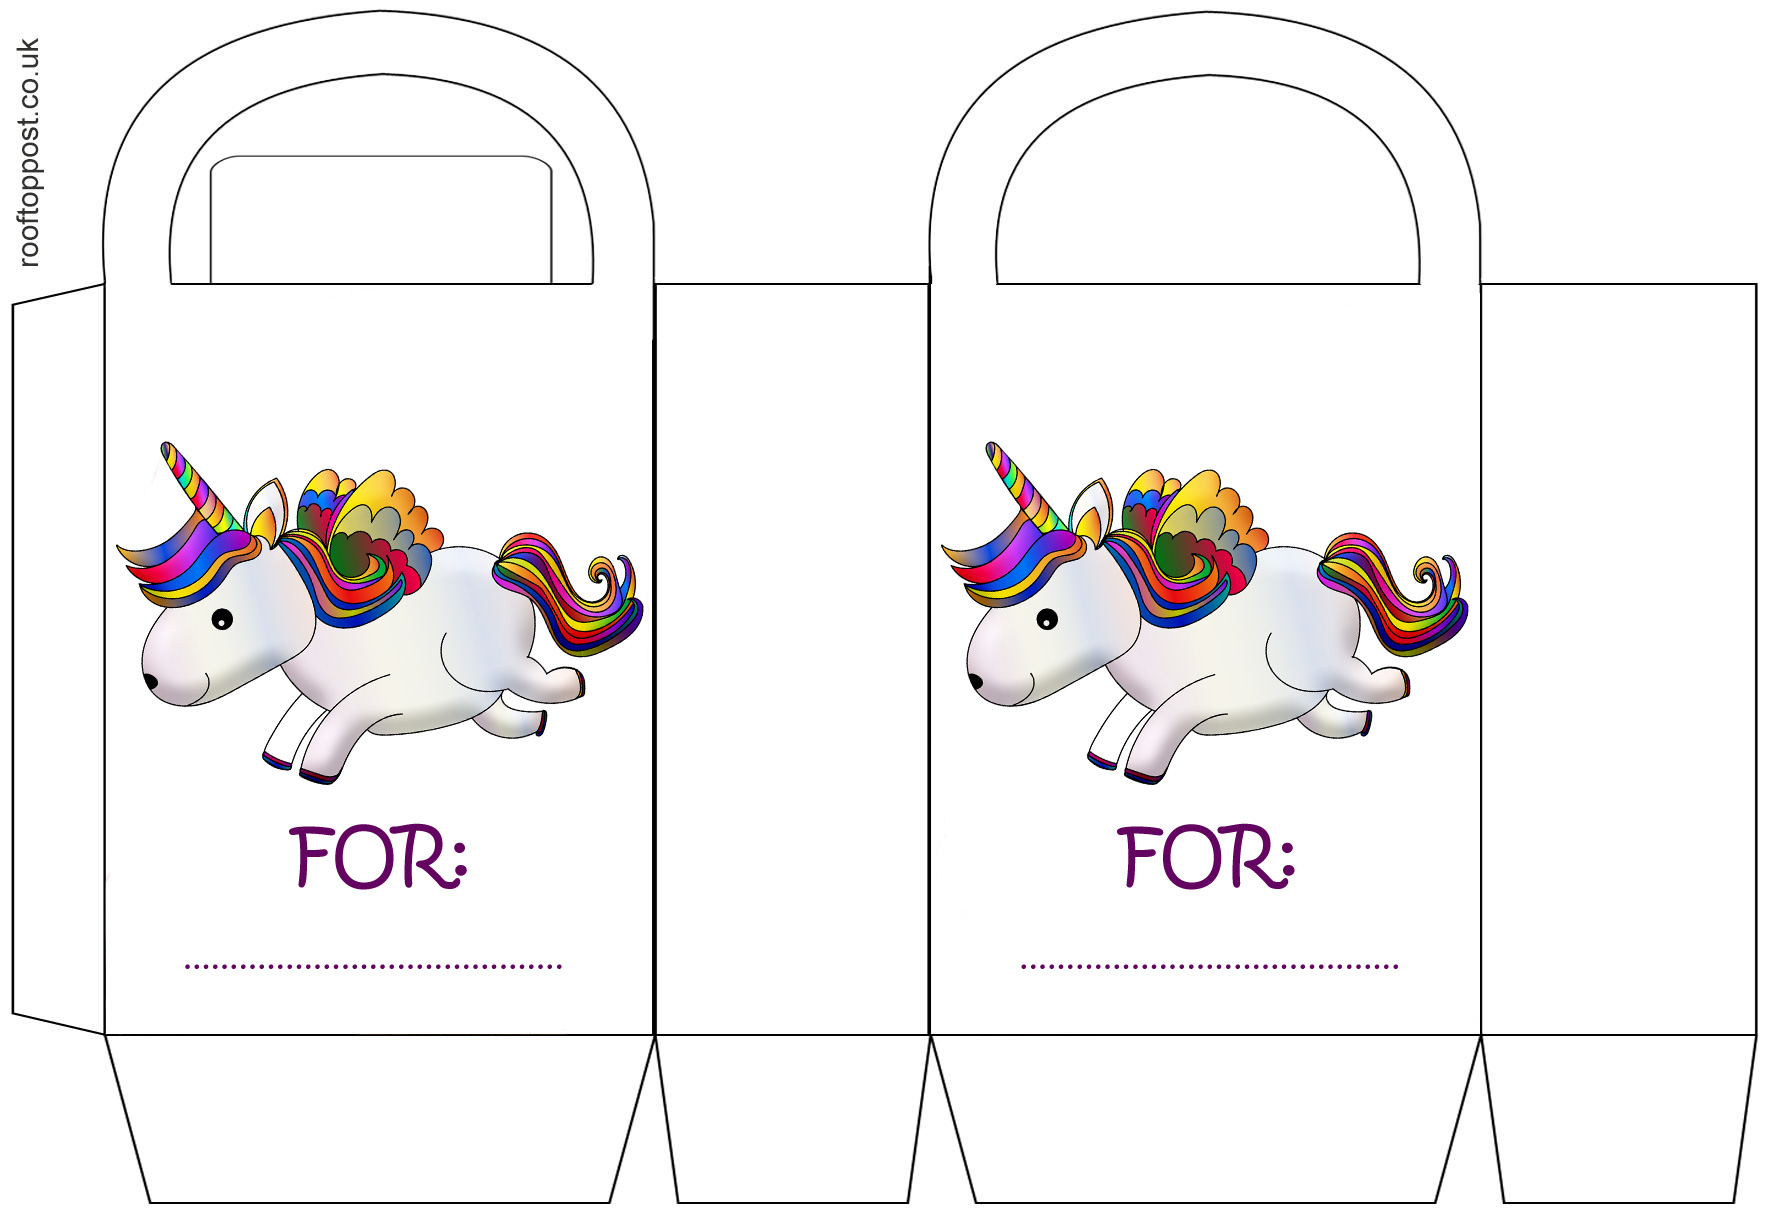 A printable party gift bag picturing a rainbow unicorn and with space to add a child's name.